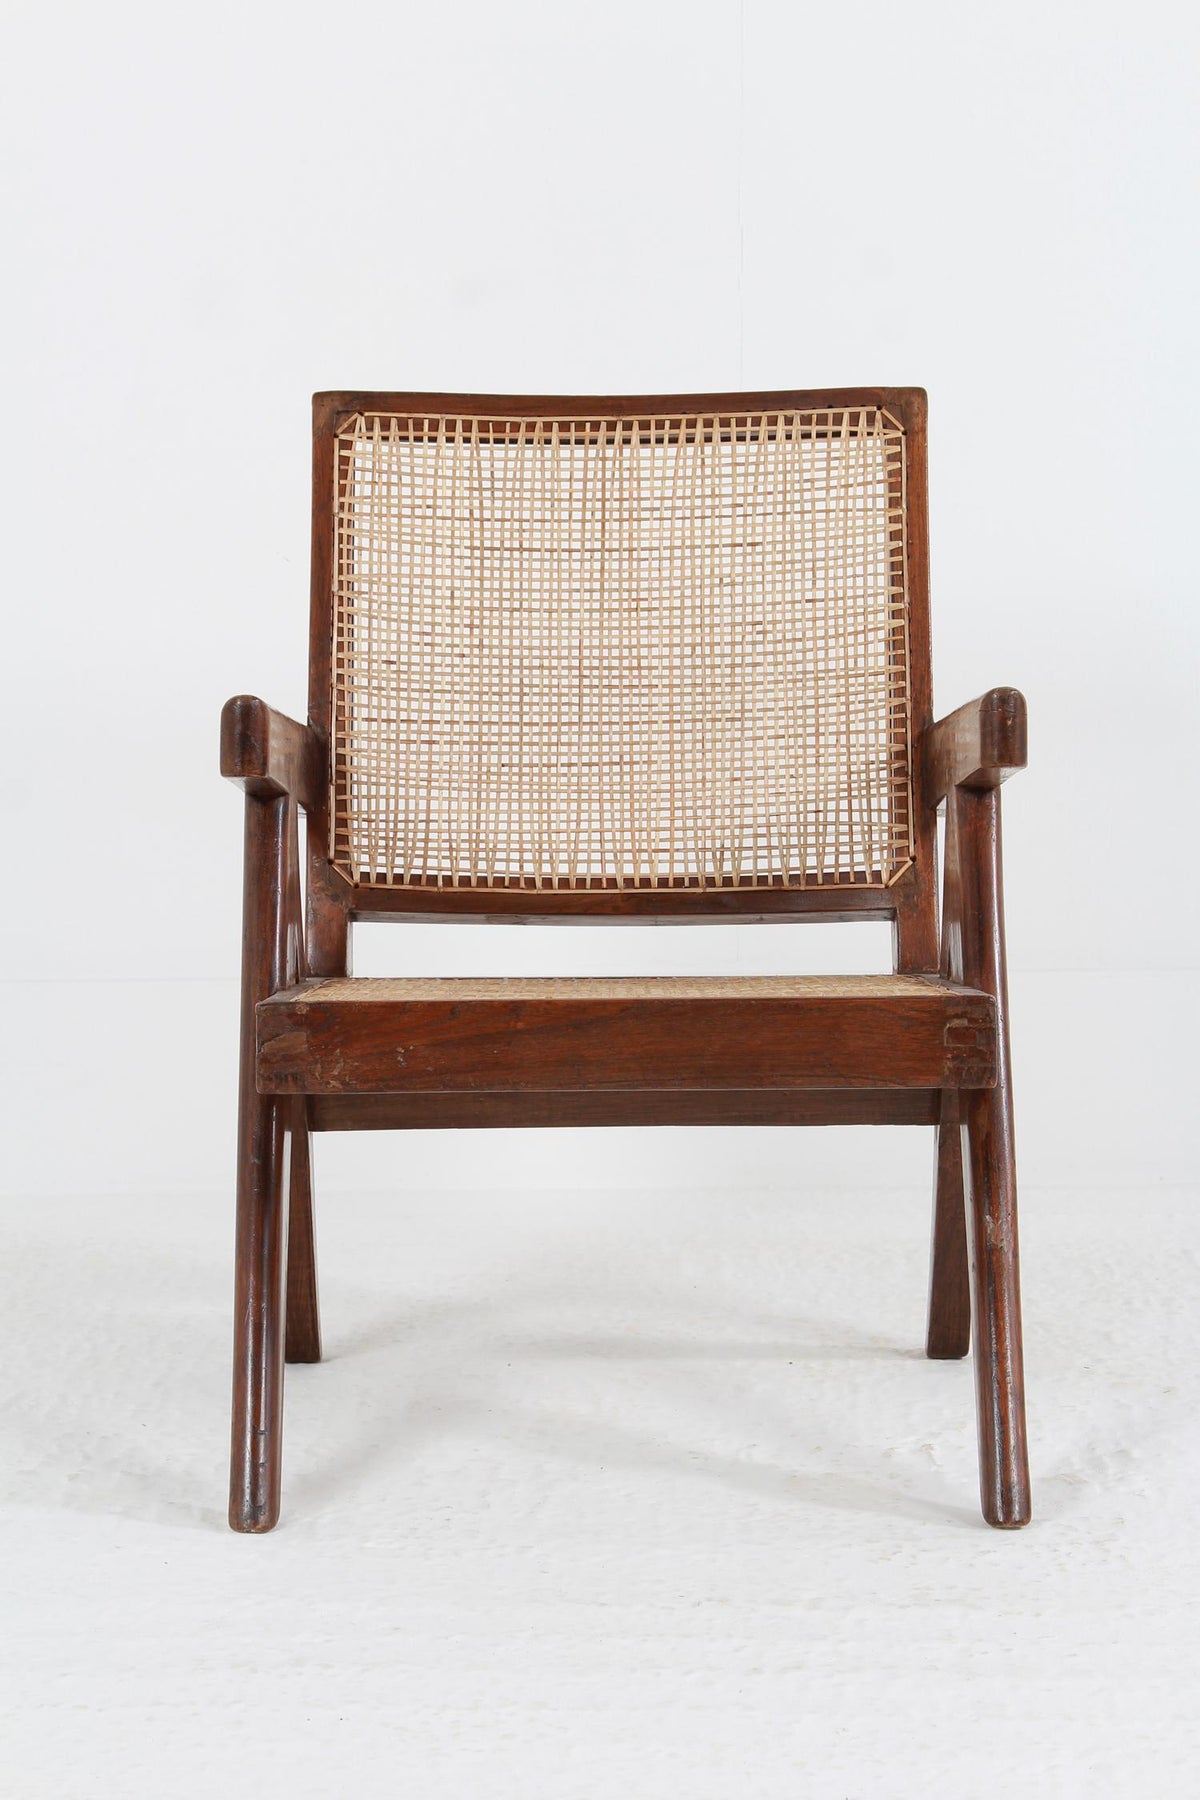 PIERRE JEANNERET MID-CENTURY LOW EASY CHAIR IN TEAK.Price on request